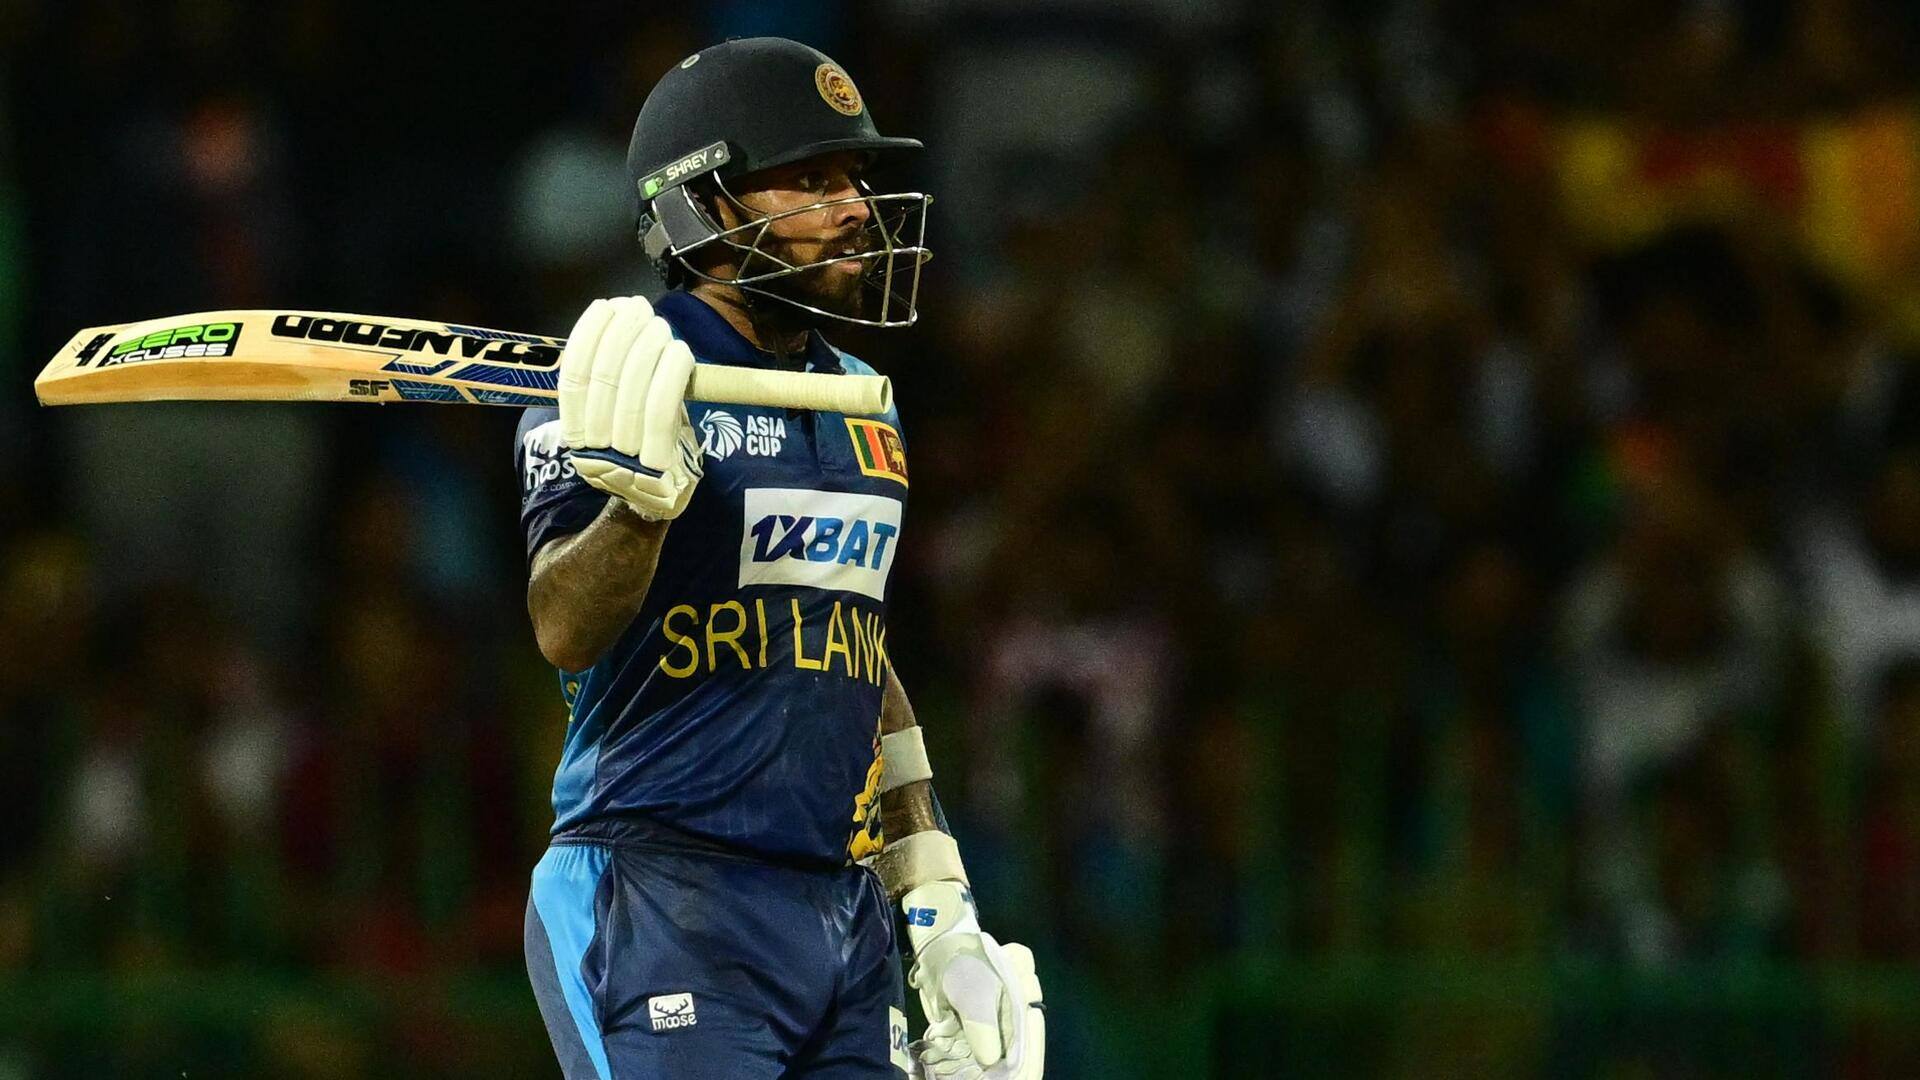 Asia Cup, Kusal Mendis slams his 25th ODI fifty: Stats